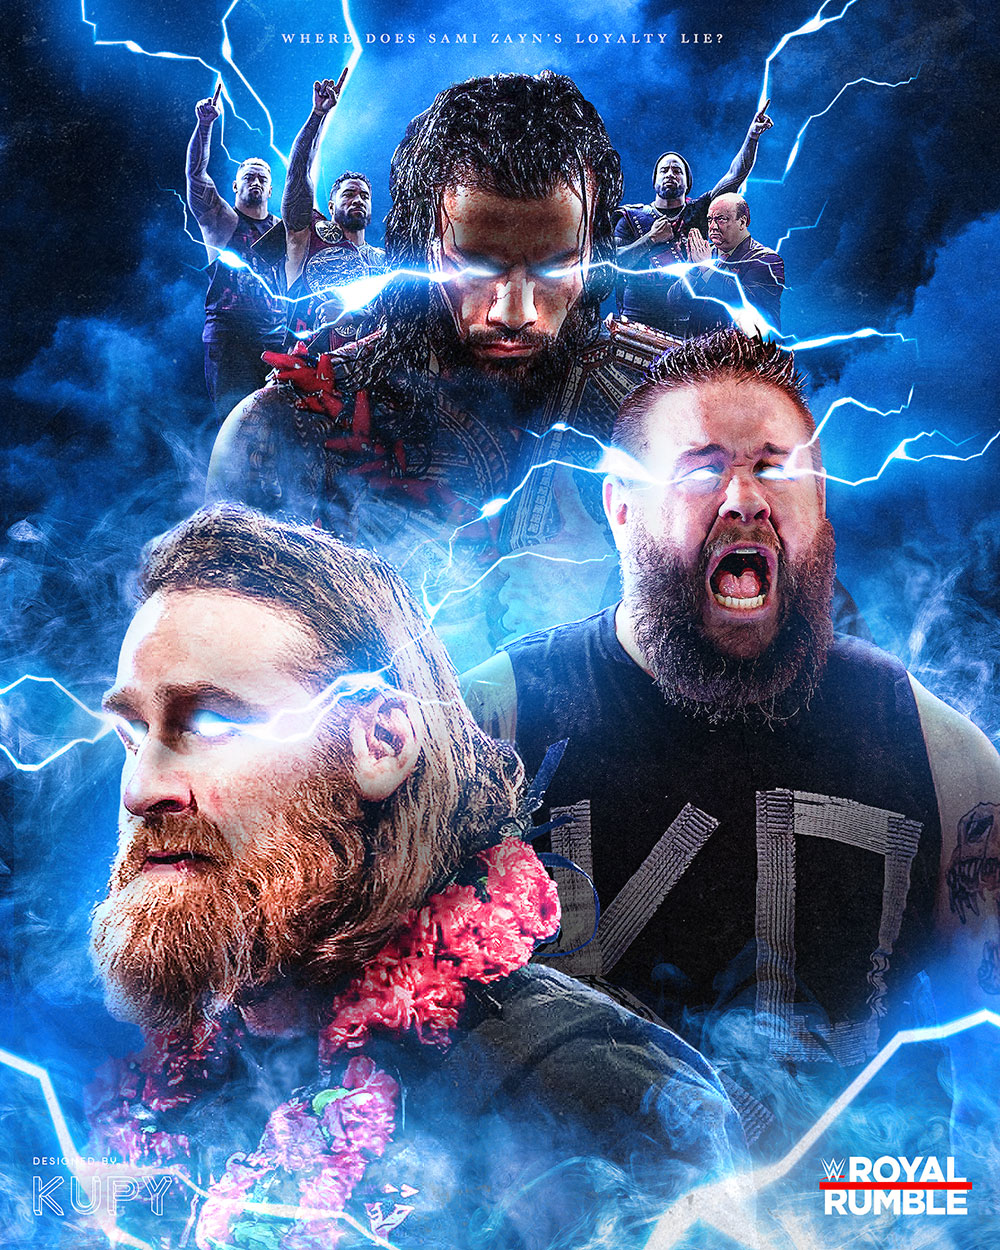 NEW Road to WrestleMania 39 – “Loyalty to The Bloodline” Sami Zayn, Kevin  Owens & Roman Reigns Royal Rumble WWE wallpaper! - Kupy Wrestling Wallpapers